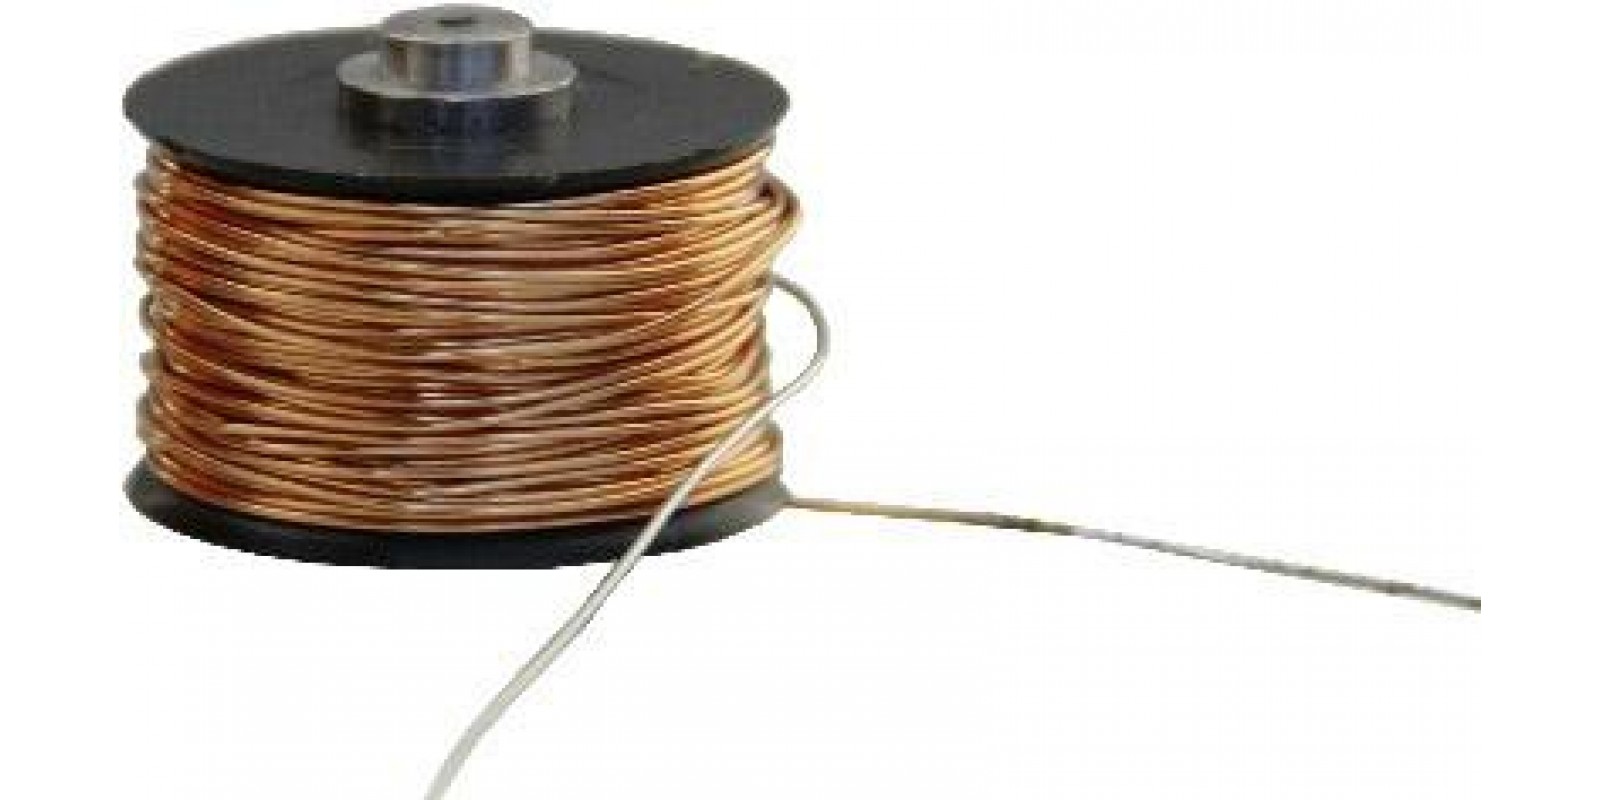 BE M17 Wire 0.30 mm², 10-m-reel